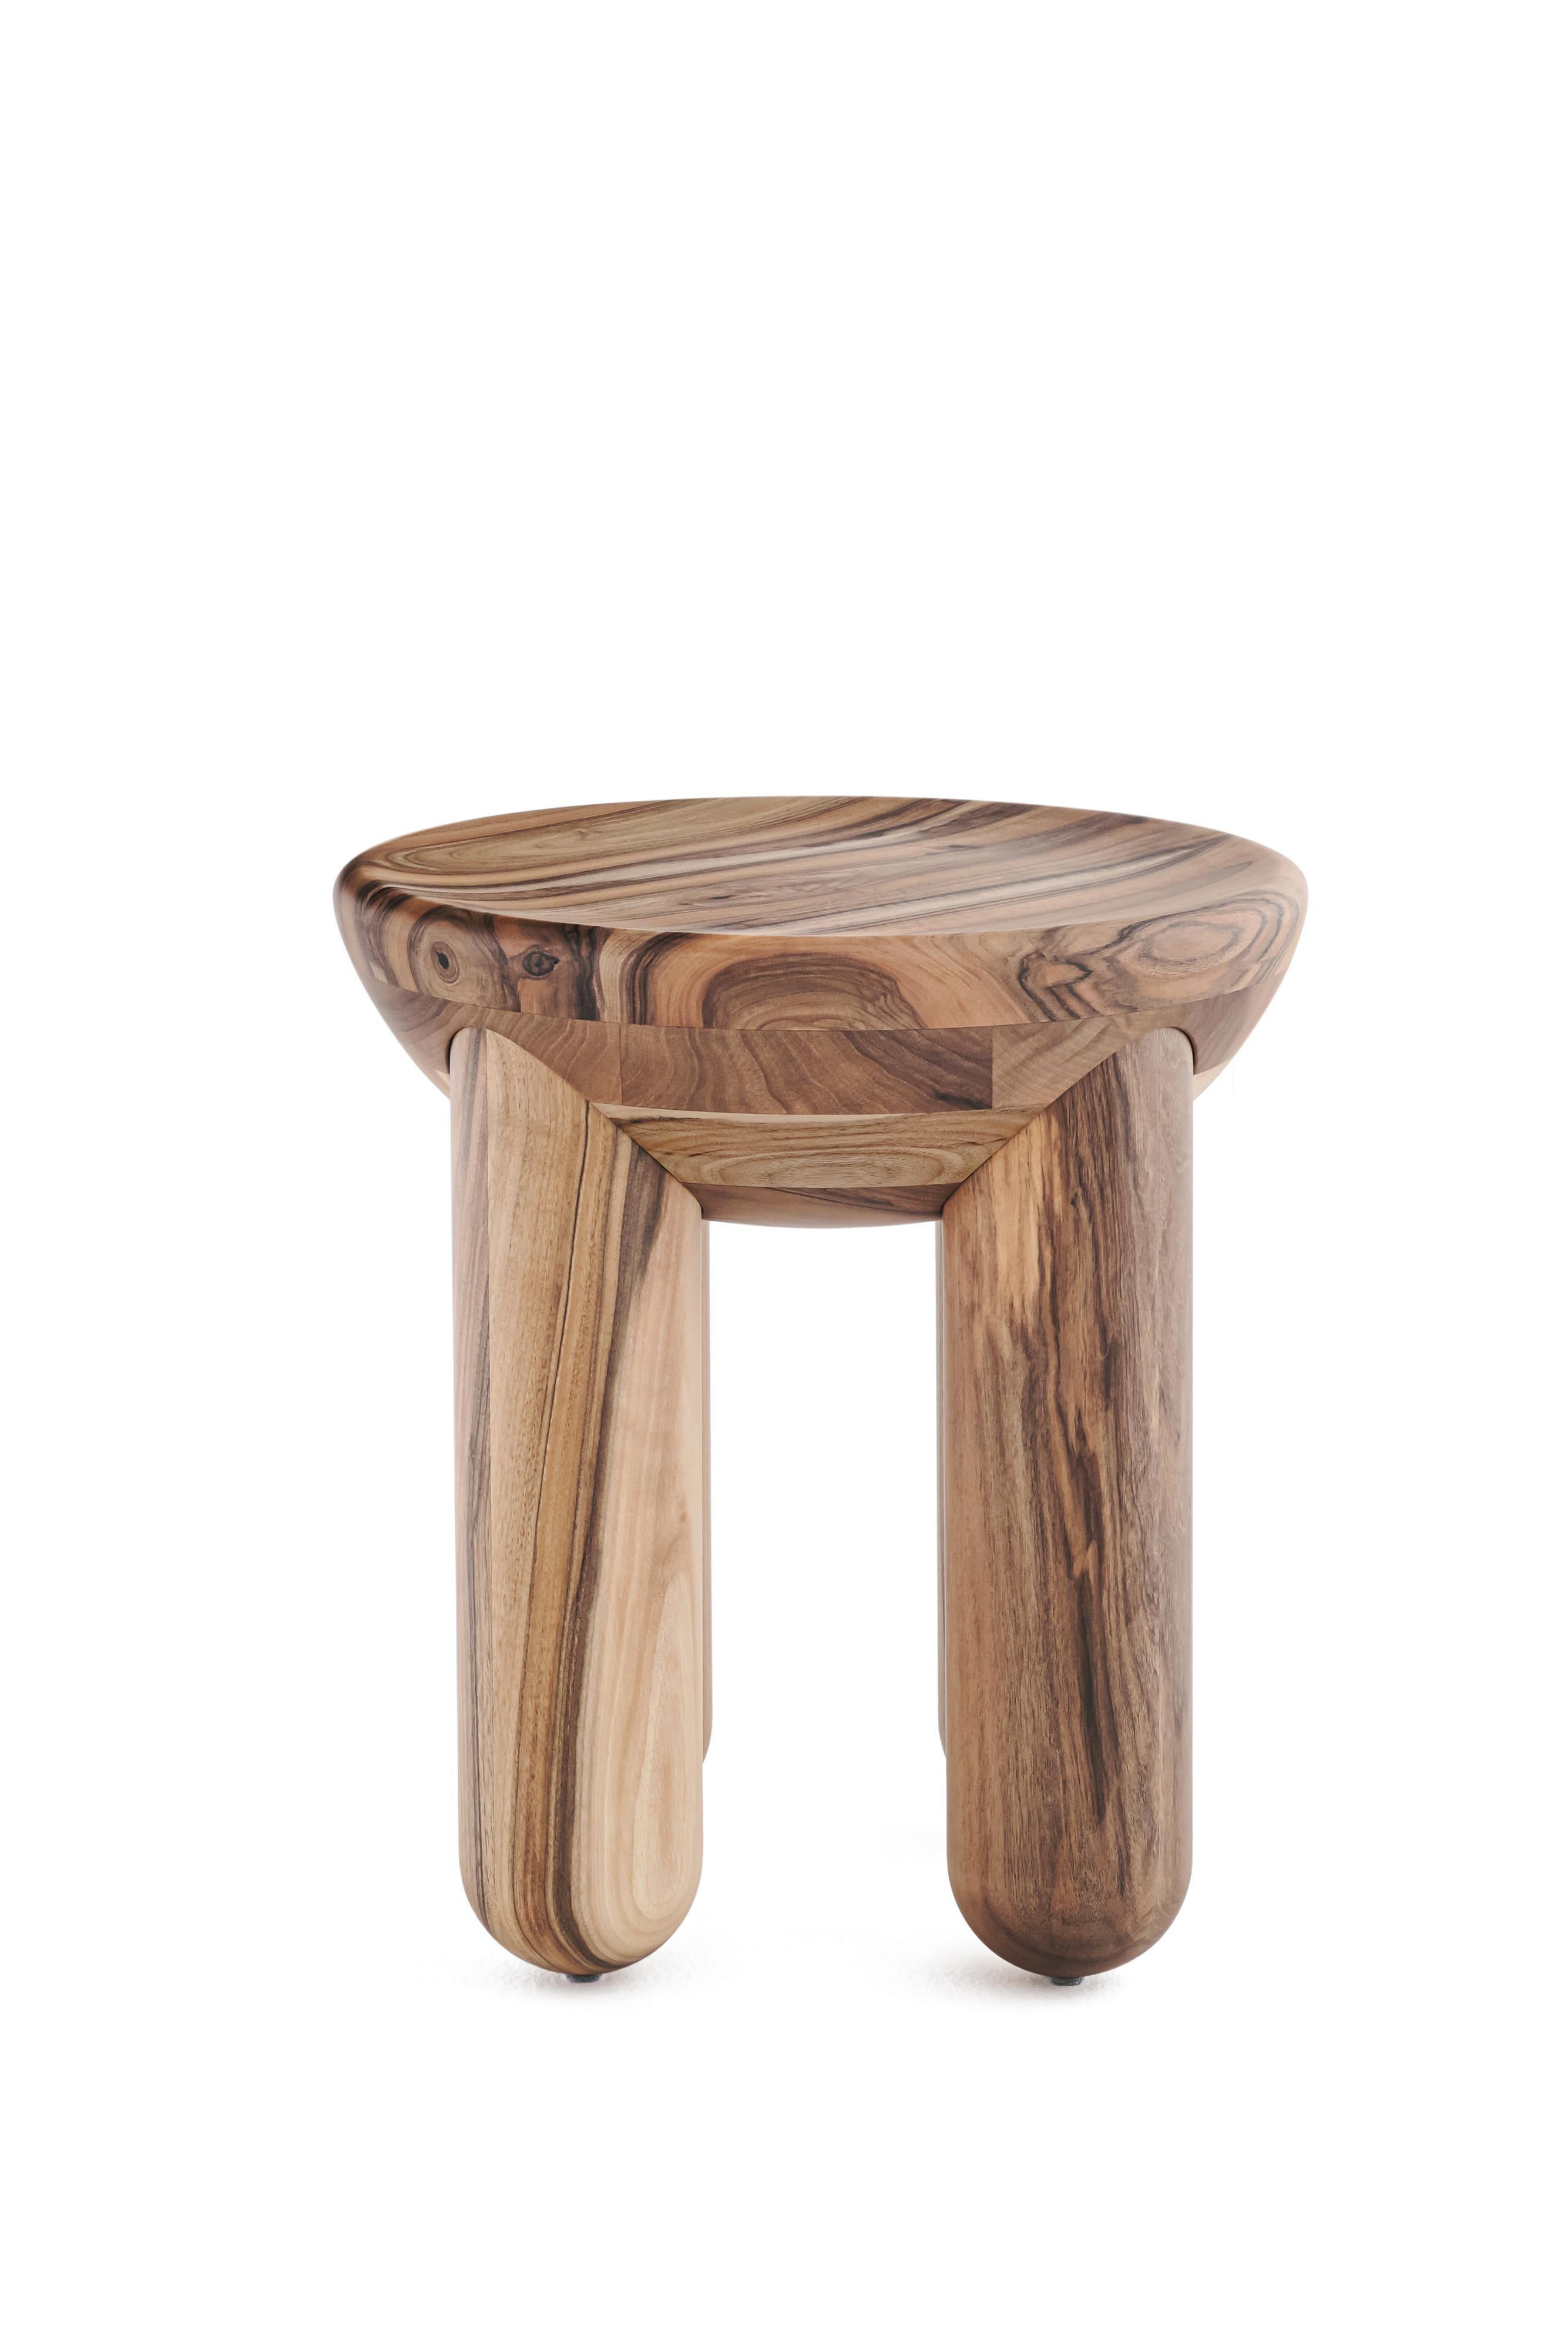 Organic Modern Contemporary Wooden Coffee or Side Table 'Freyja 3' by Noom, Walnut For Sale